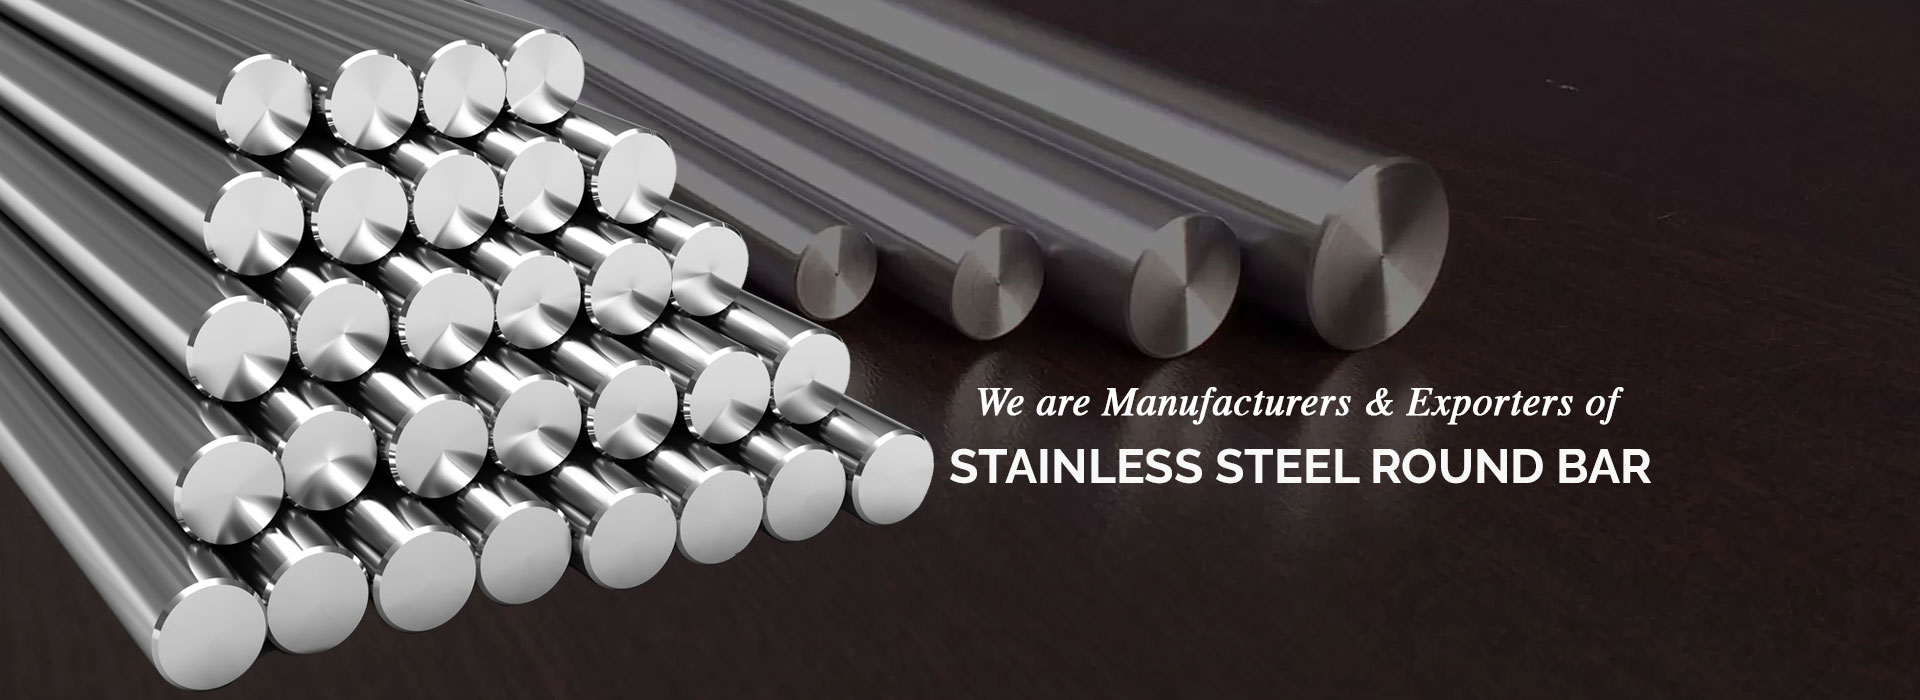 Stainless Steel Round Bar Manufacturers in Dubai